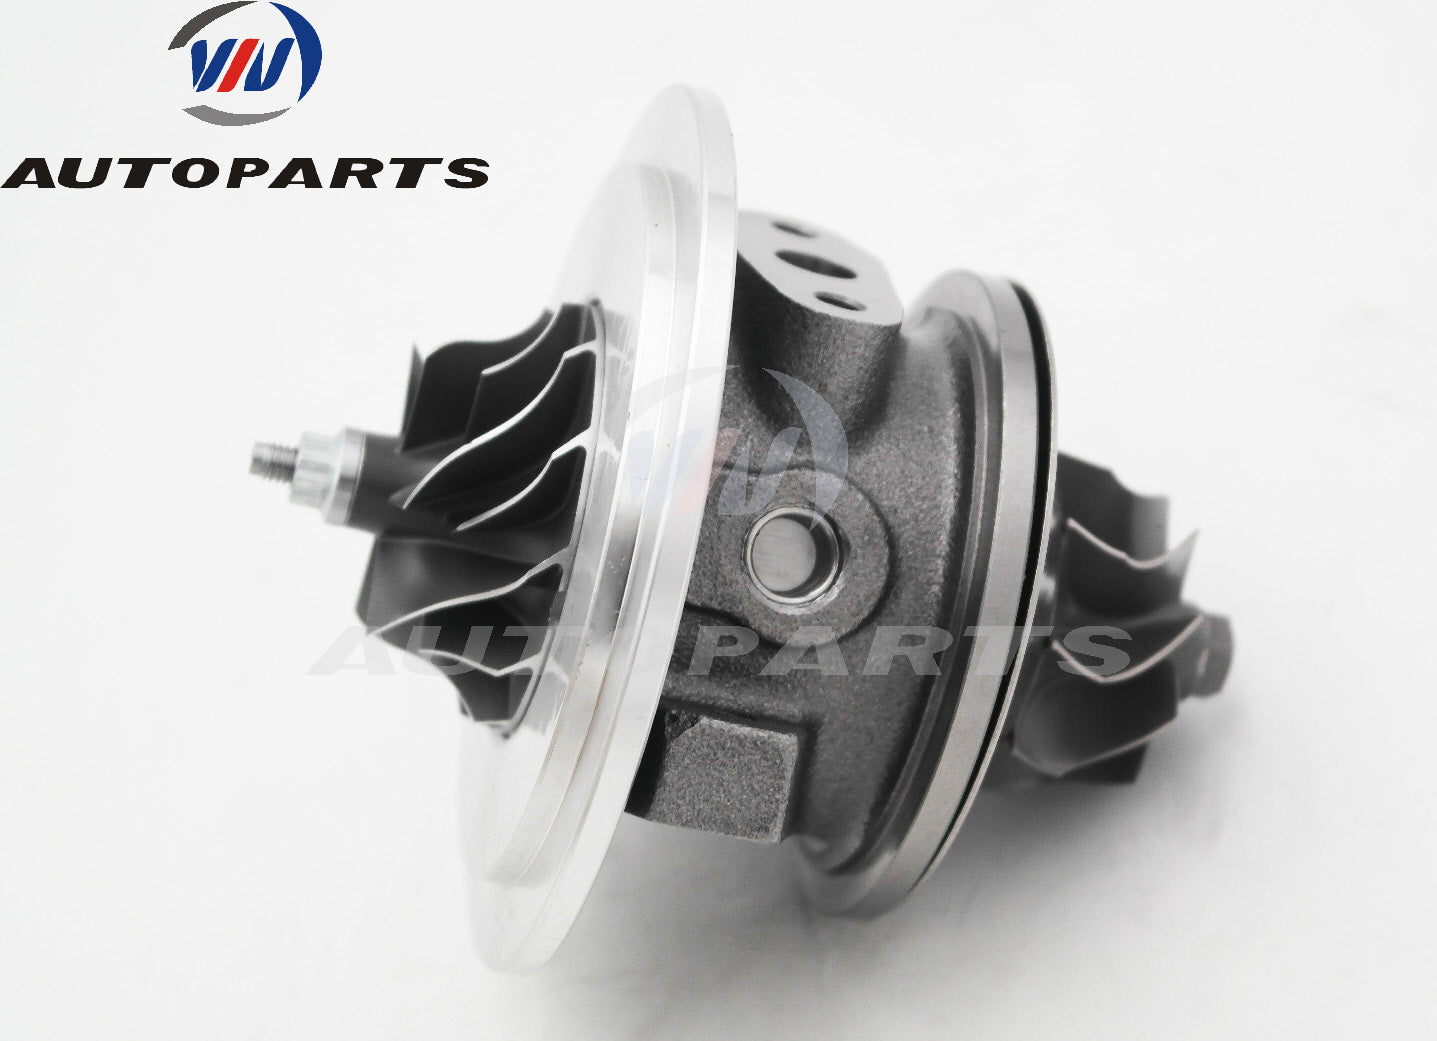 CHRA 479054-0002 for Turbocharger 701196-0001 for Nissan Safari, Patrol with 2.8L Diesel Engine